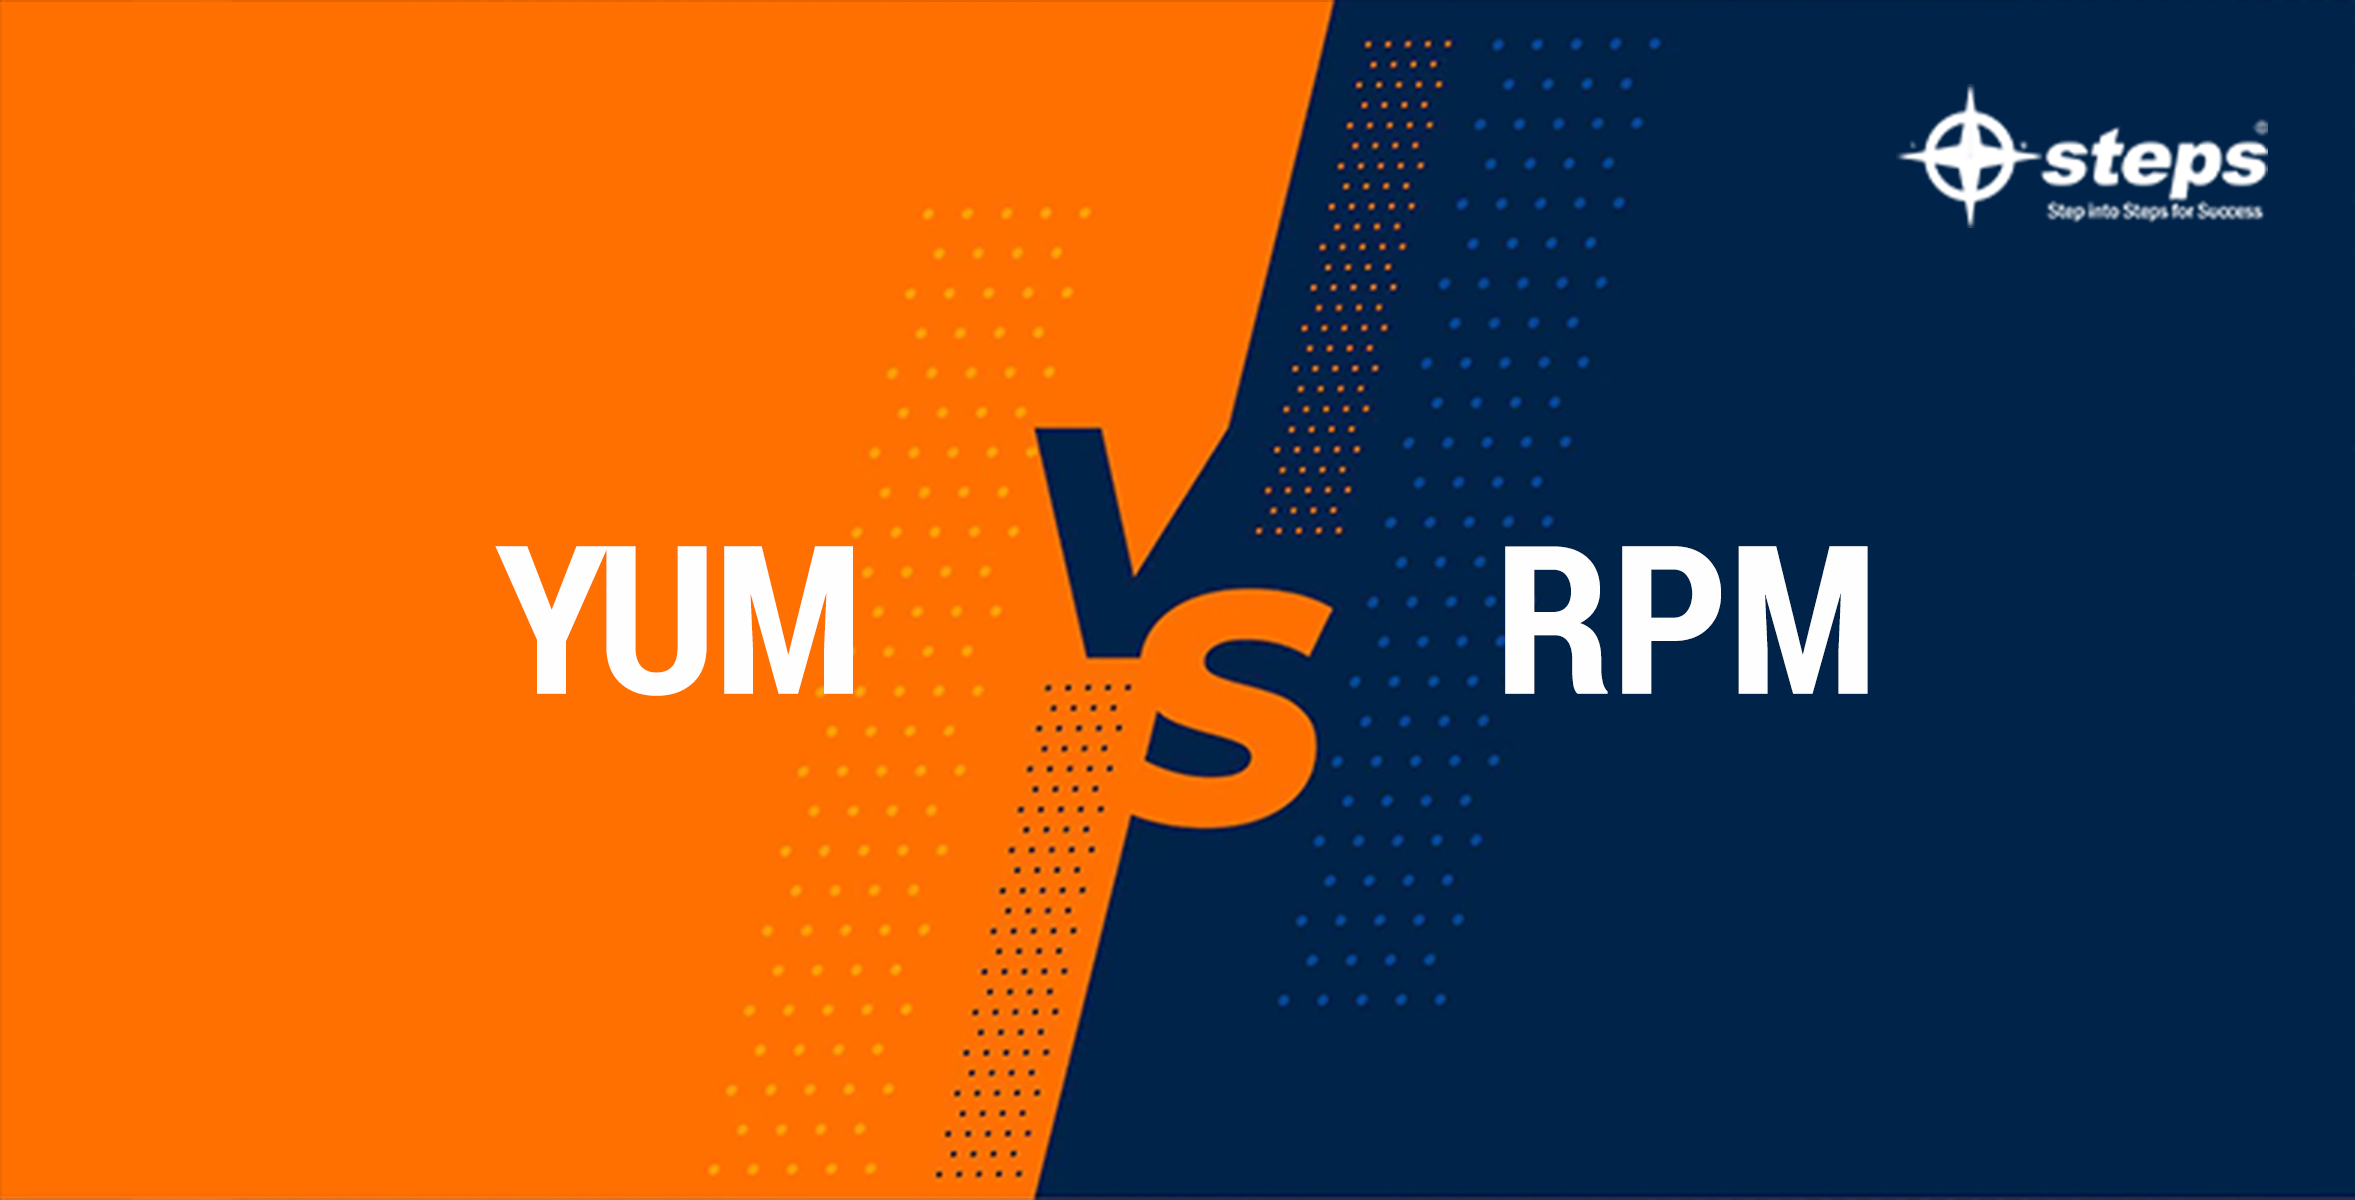 DIFFERENCE BETWEEN YUM AND RPM